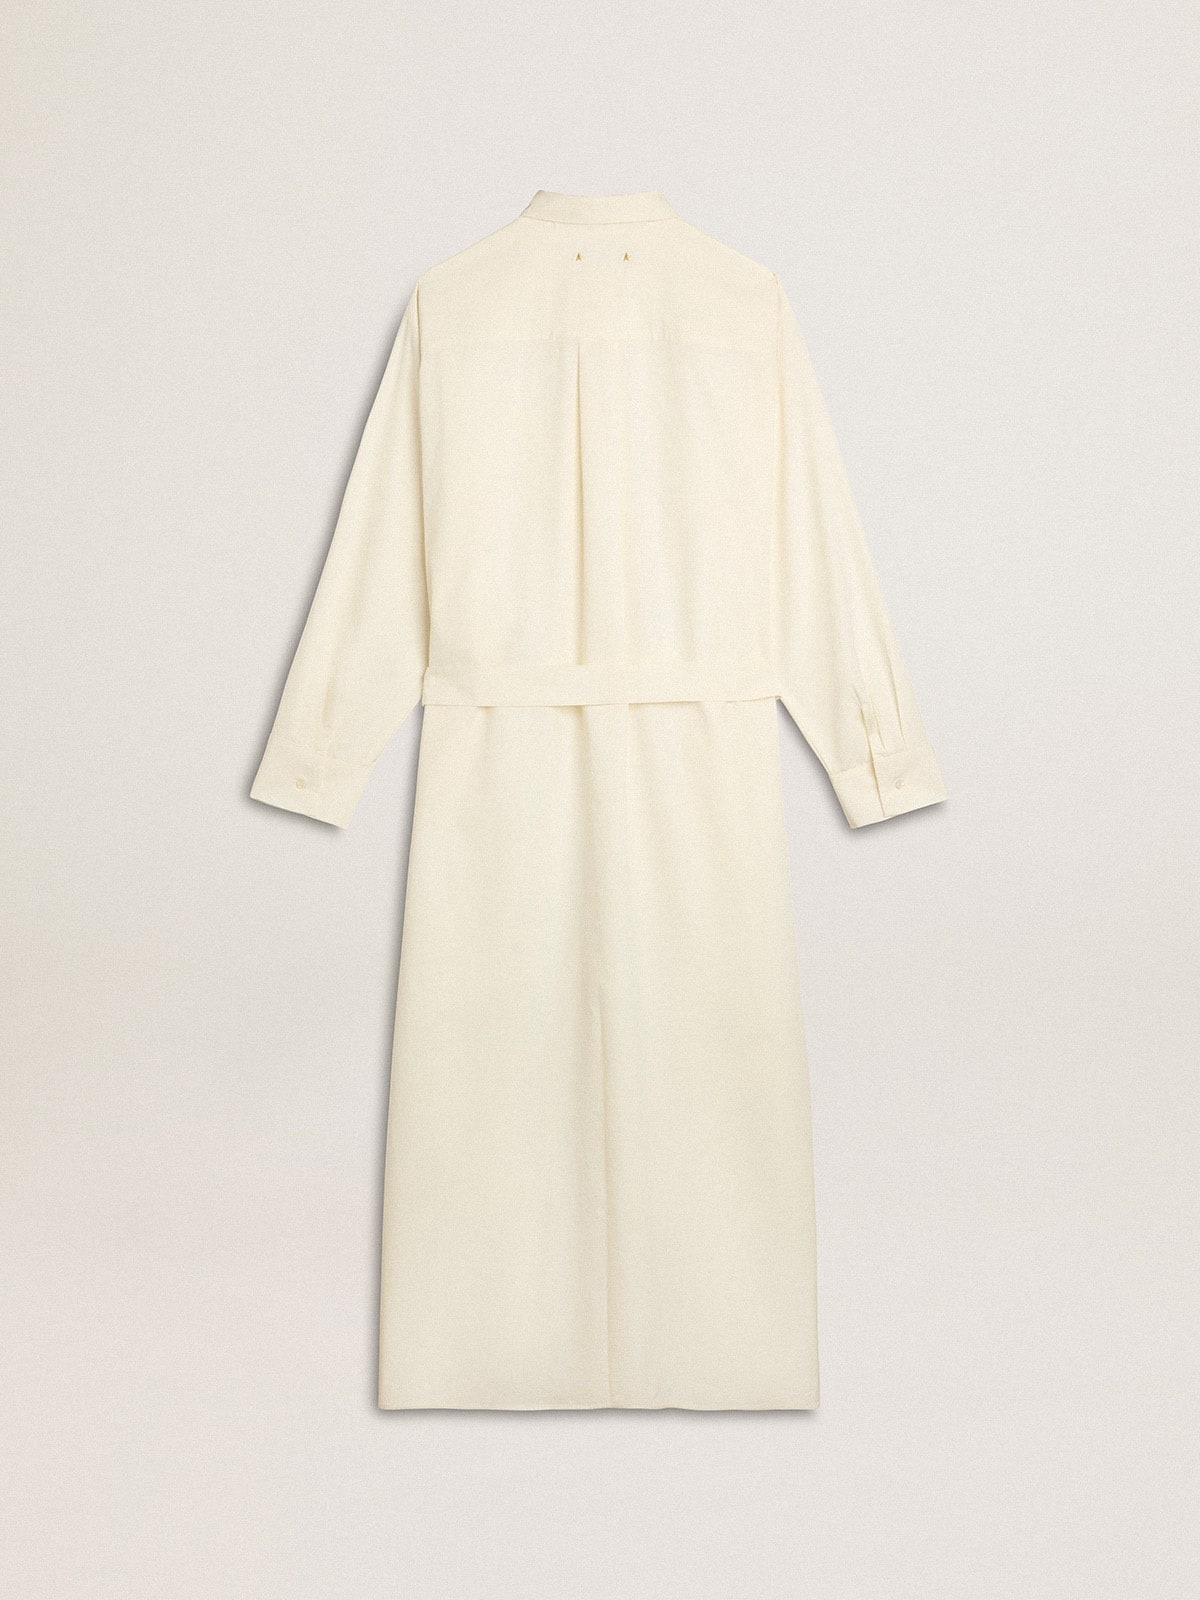 Long shirt dress in solid color cotton poplin - 5